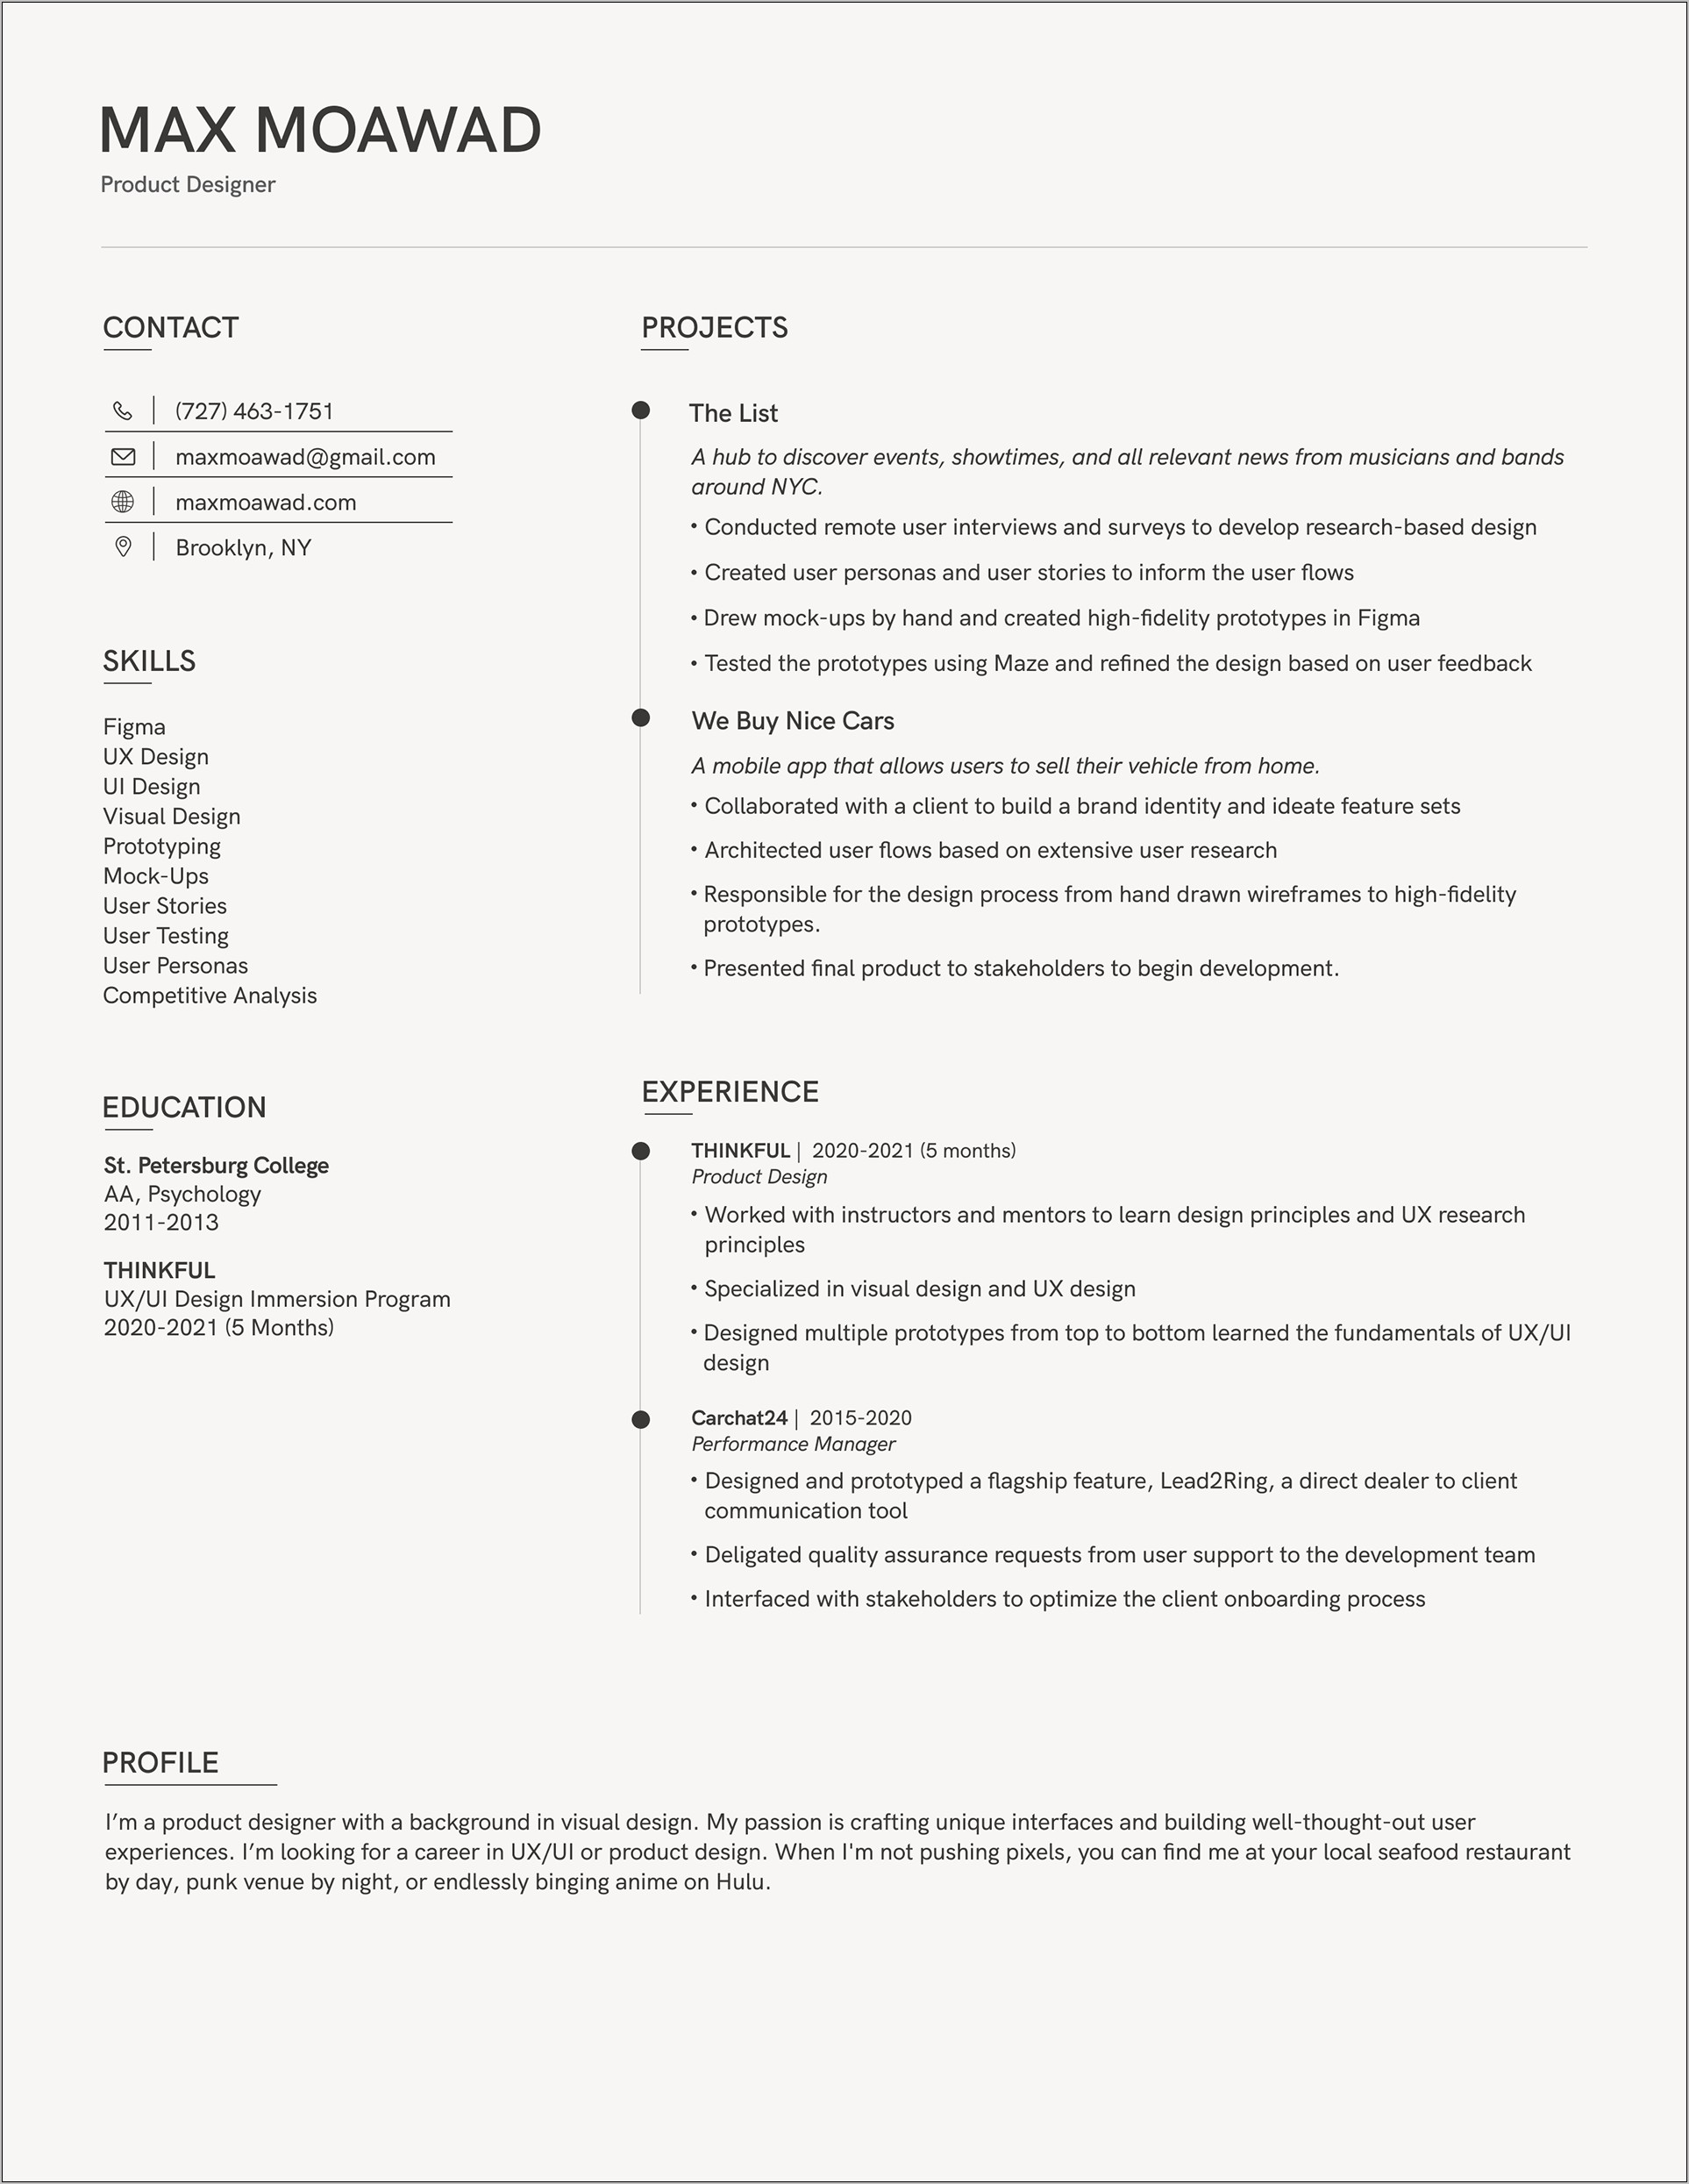 Product Manager Resume User Stories User Interviews